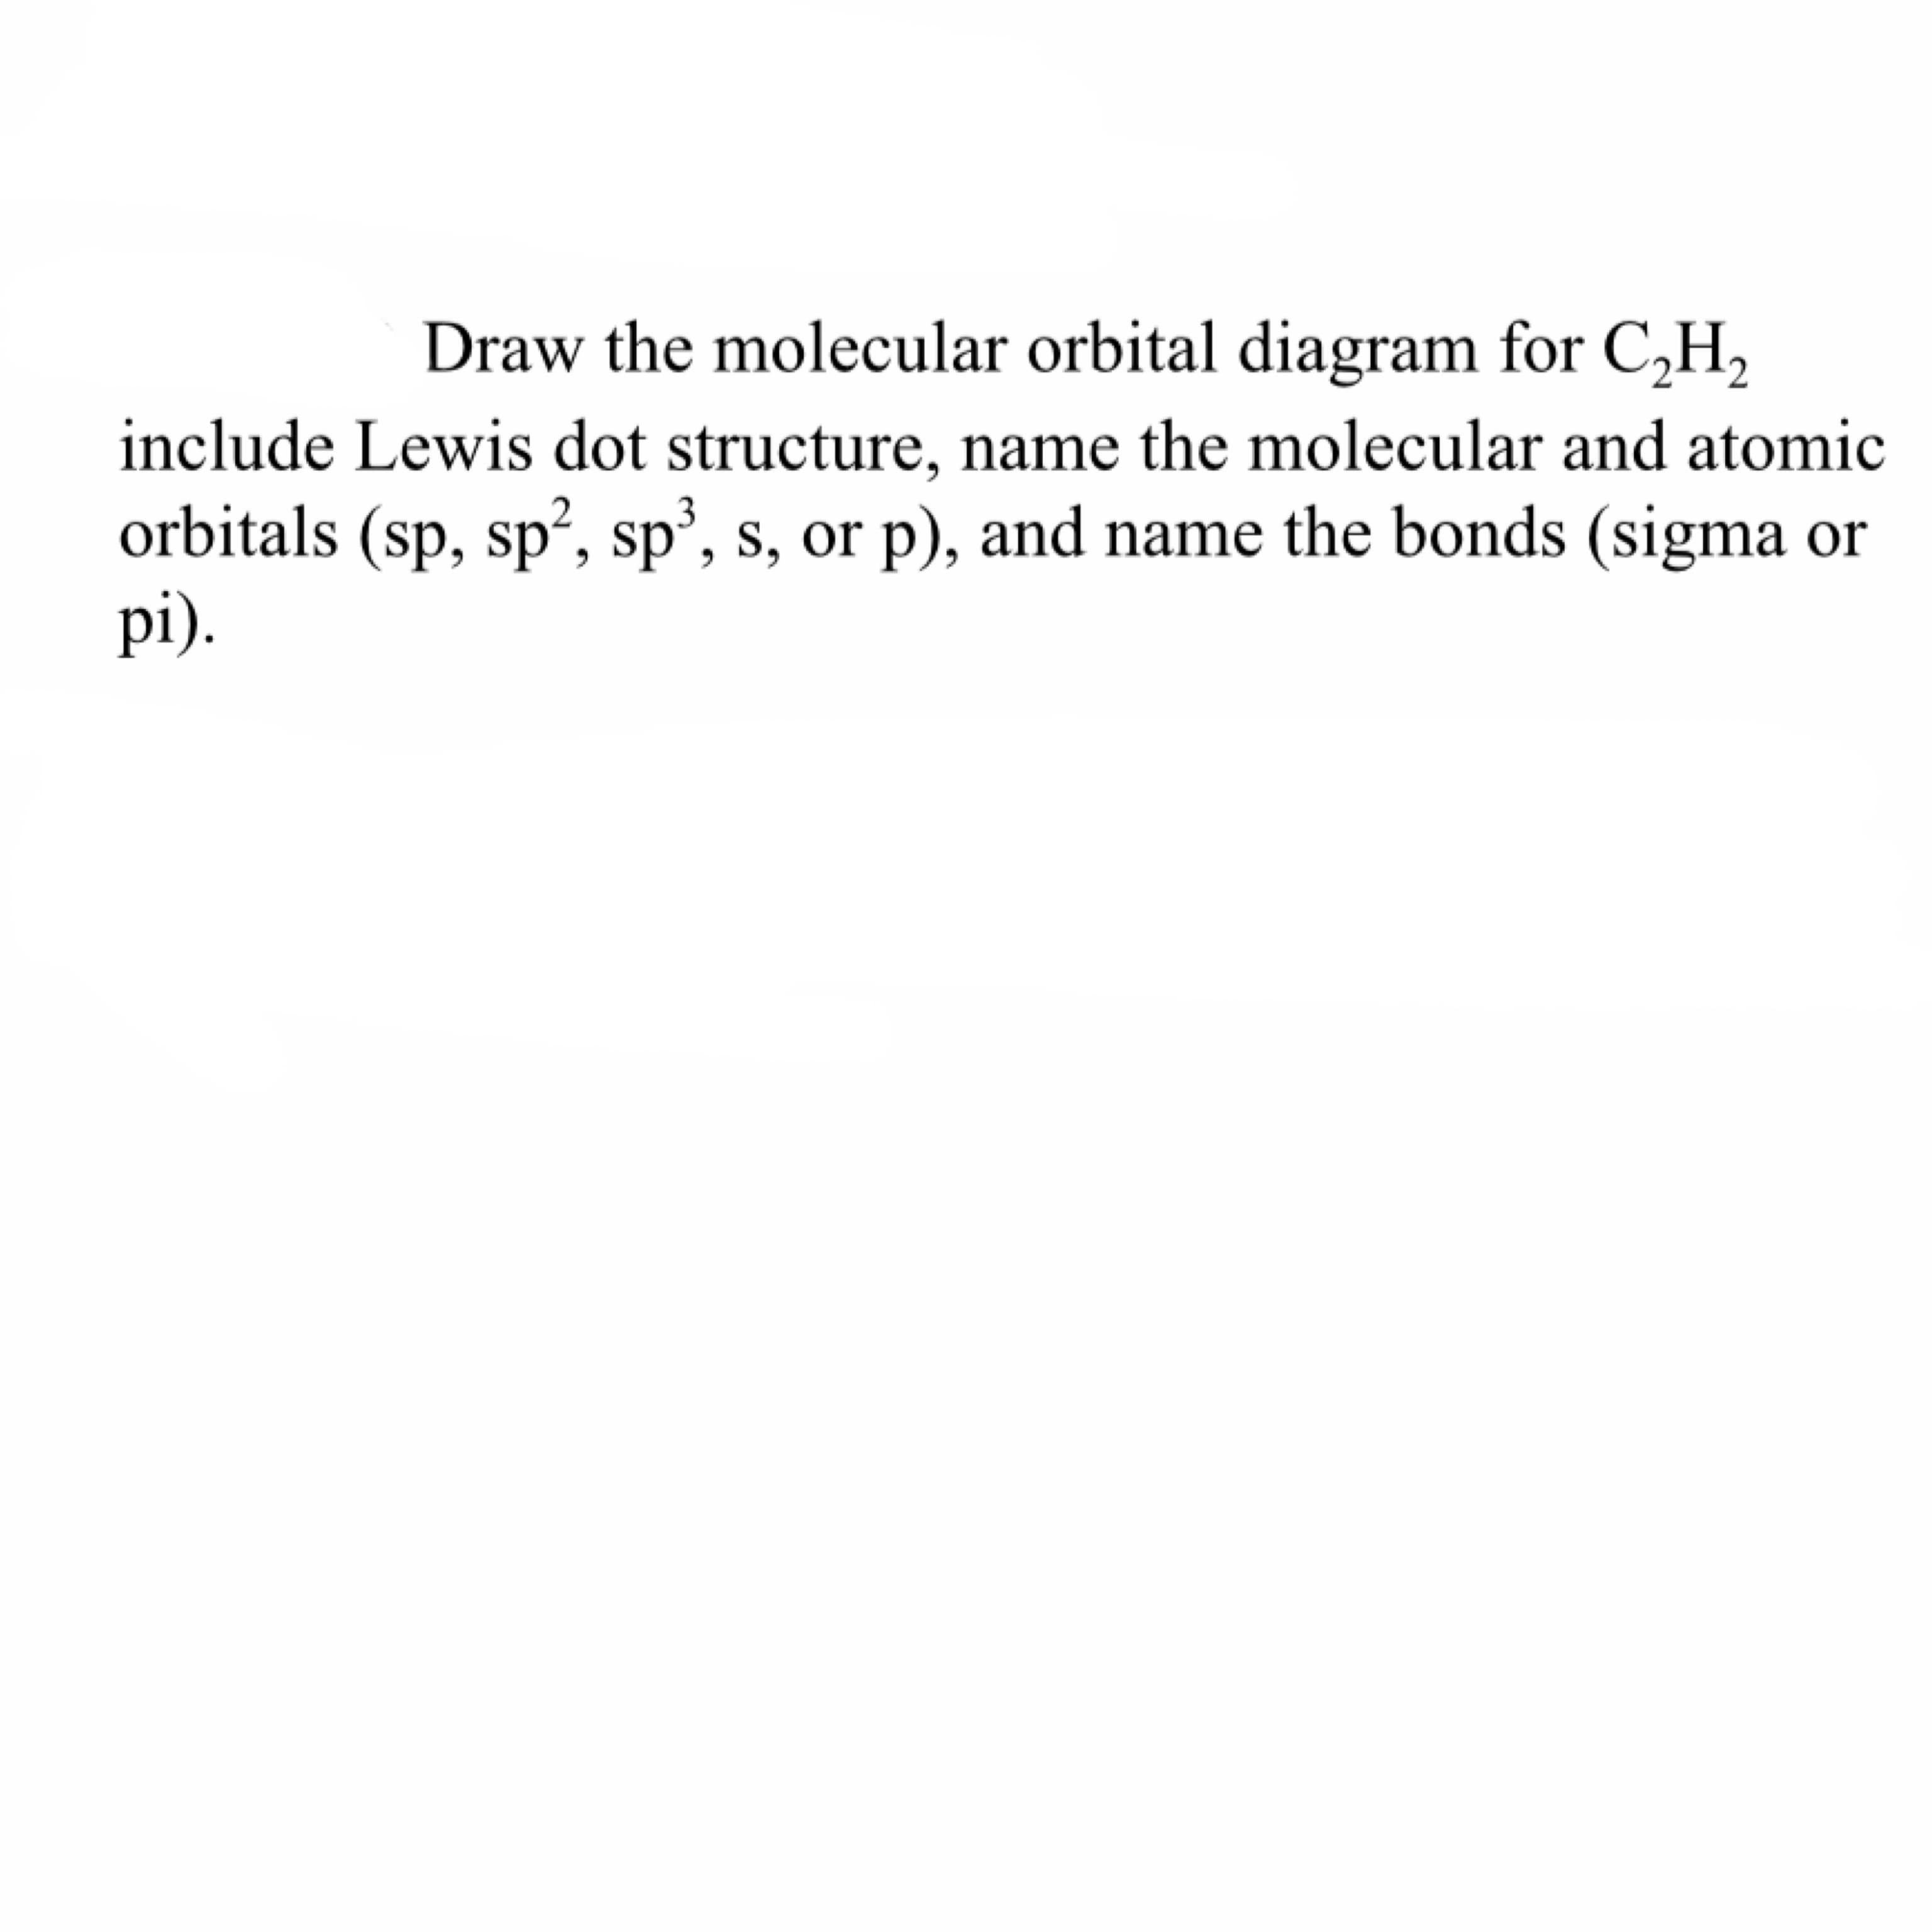 Draw the molecular orbital diagram for C,H,
include Lewis dot structure, name the molecular and atomic
orbitals (sp, sp², sp’, s, or p), and name the bonds (sigma or
pi).
3
